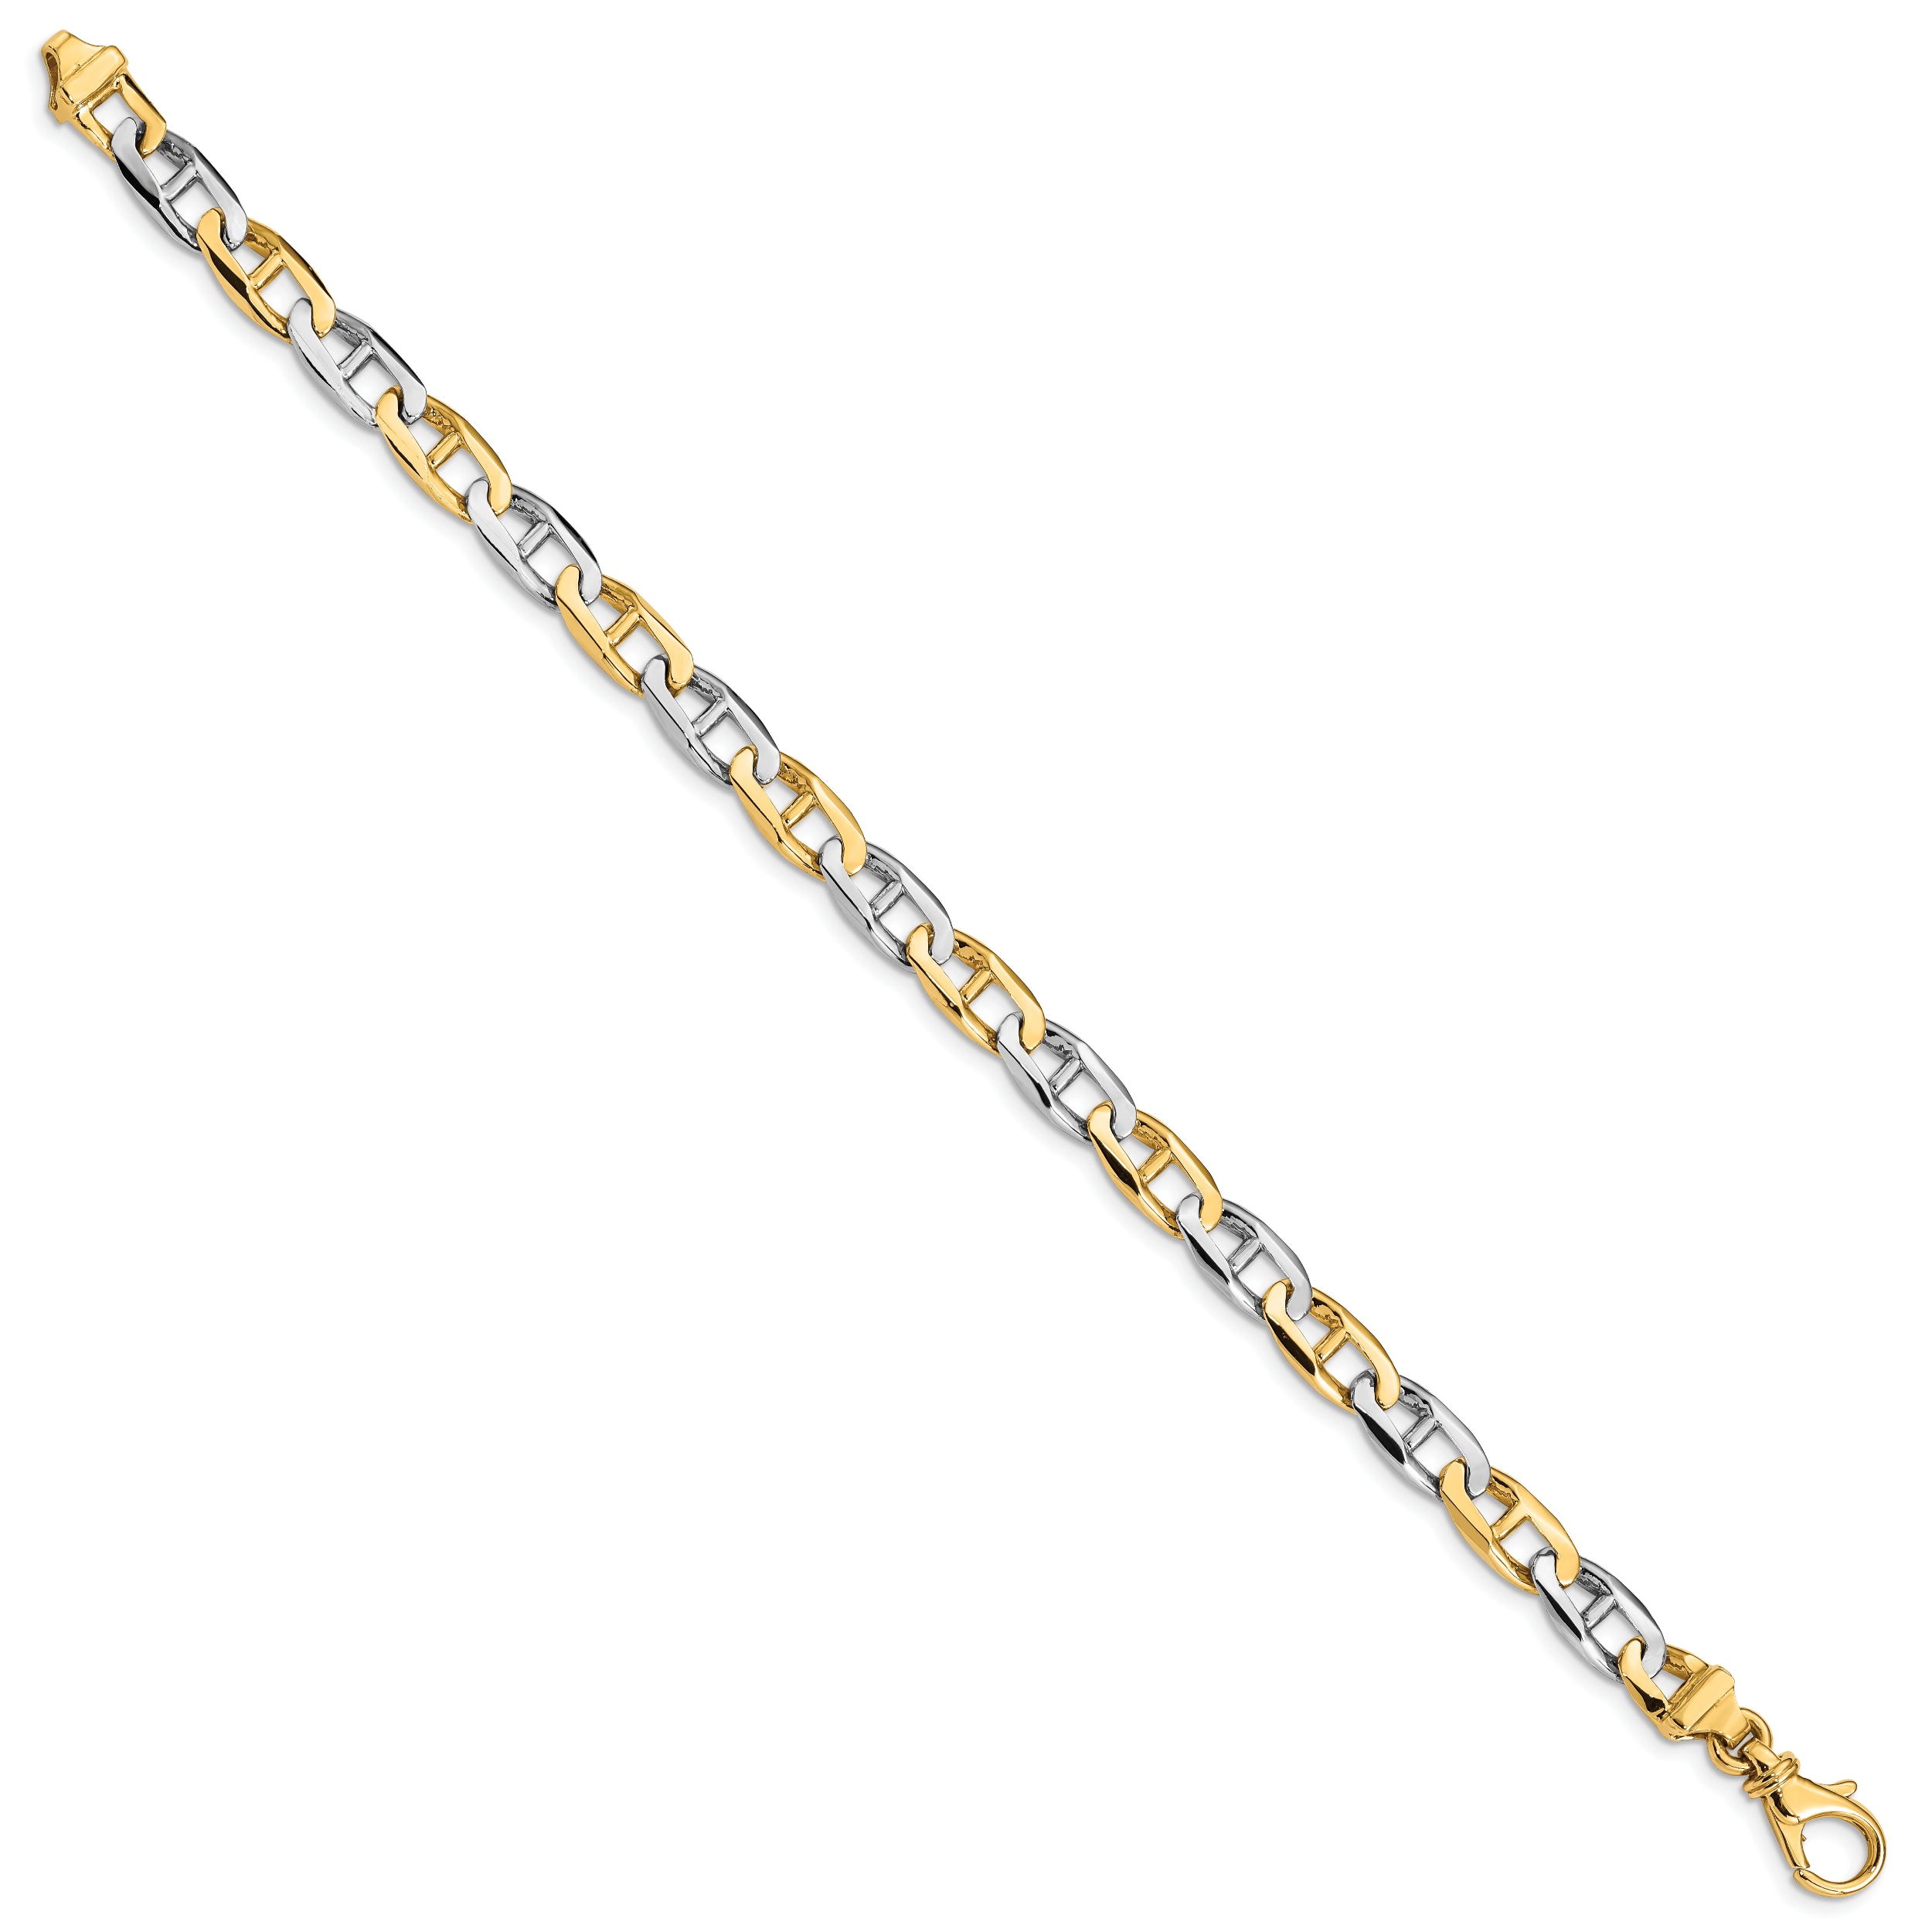 14K Two-tone 7.25 inch 6.6mm Hand Polished Fancy Flat Anchor Link with Fancy Lobster Clasp Bracelet